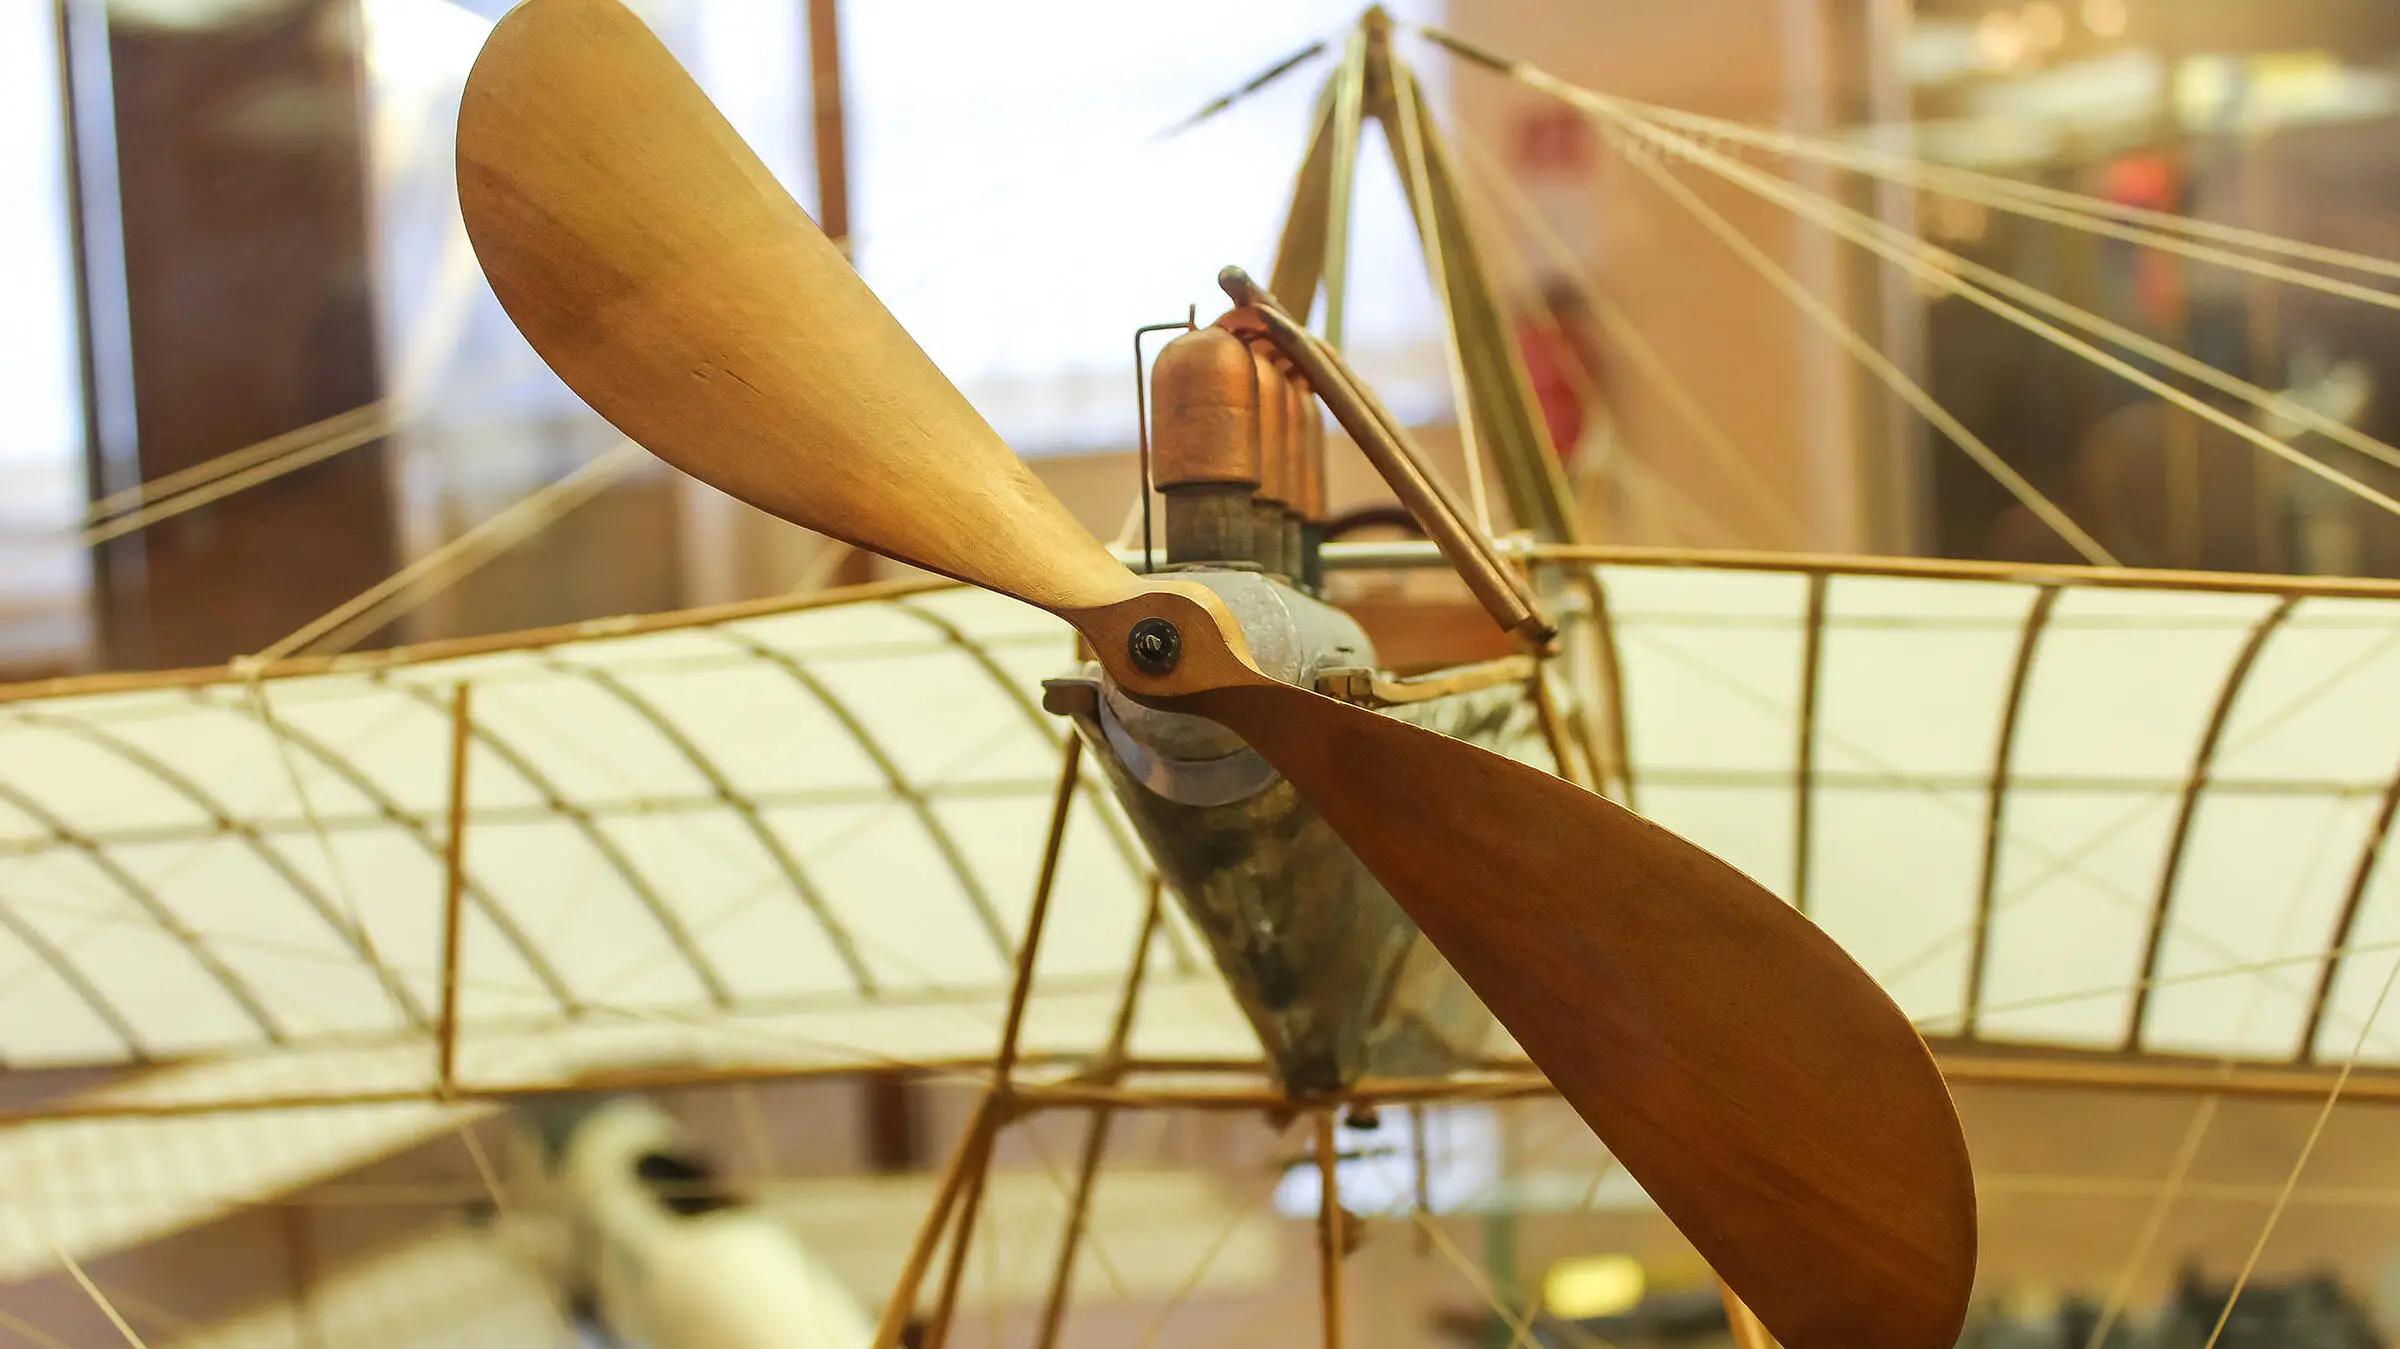 Detailed view of a wooden aeroplane